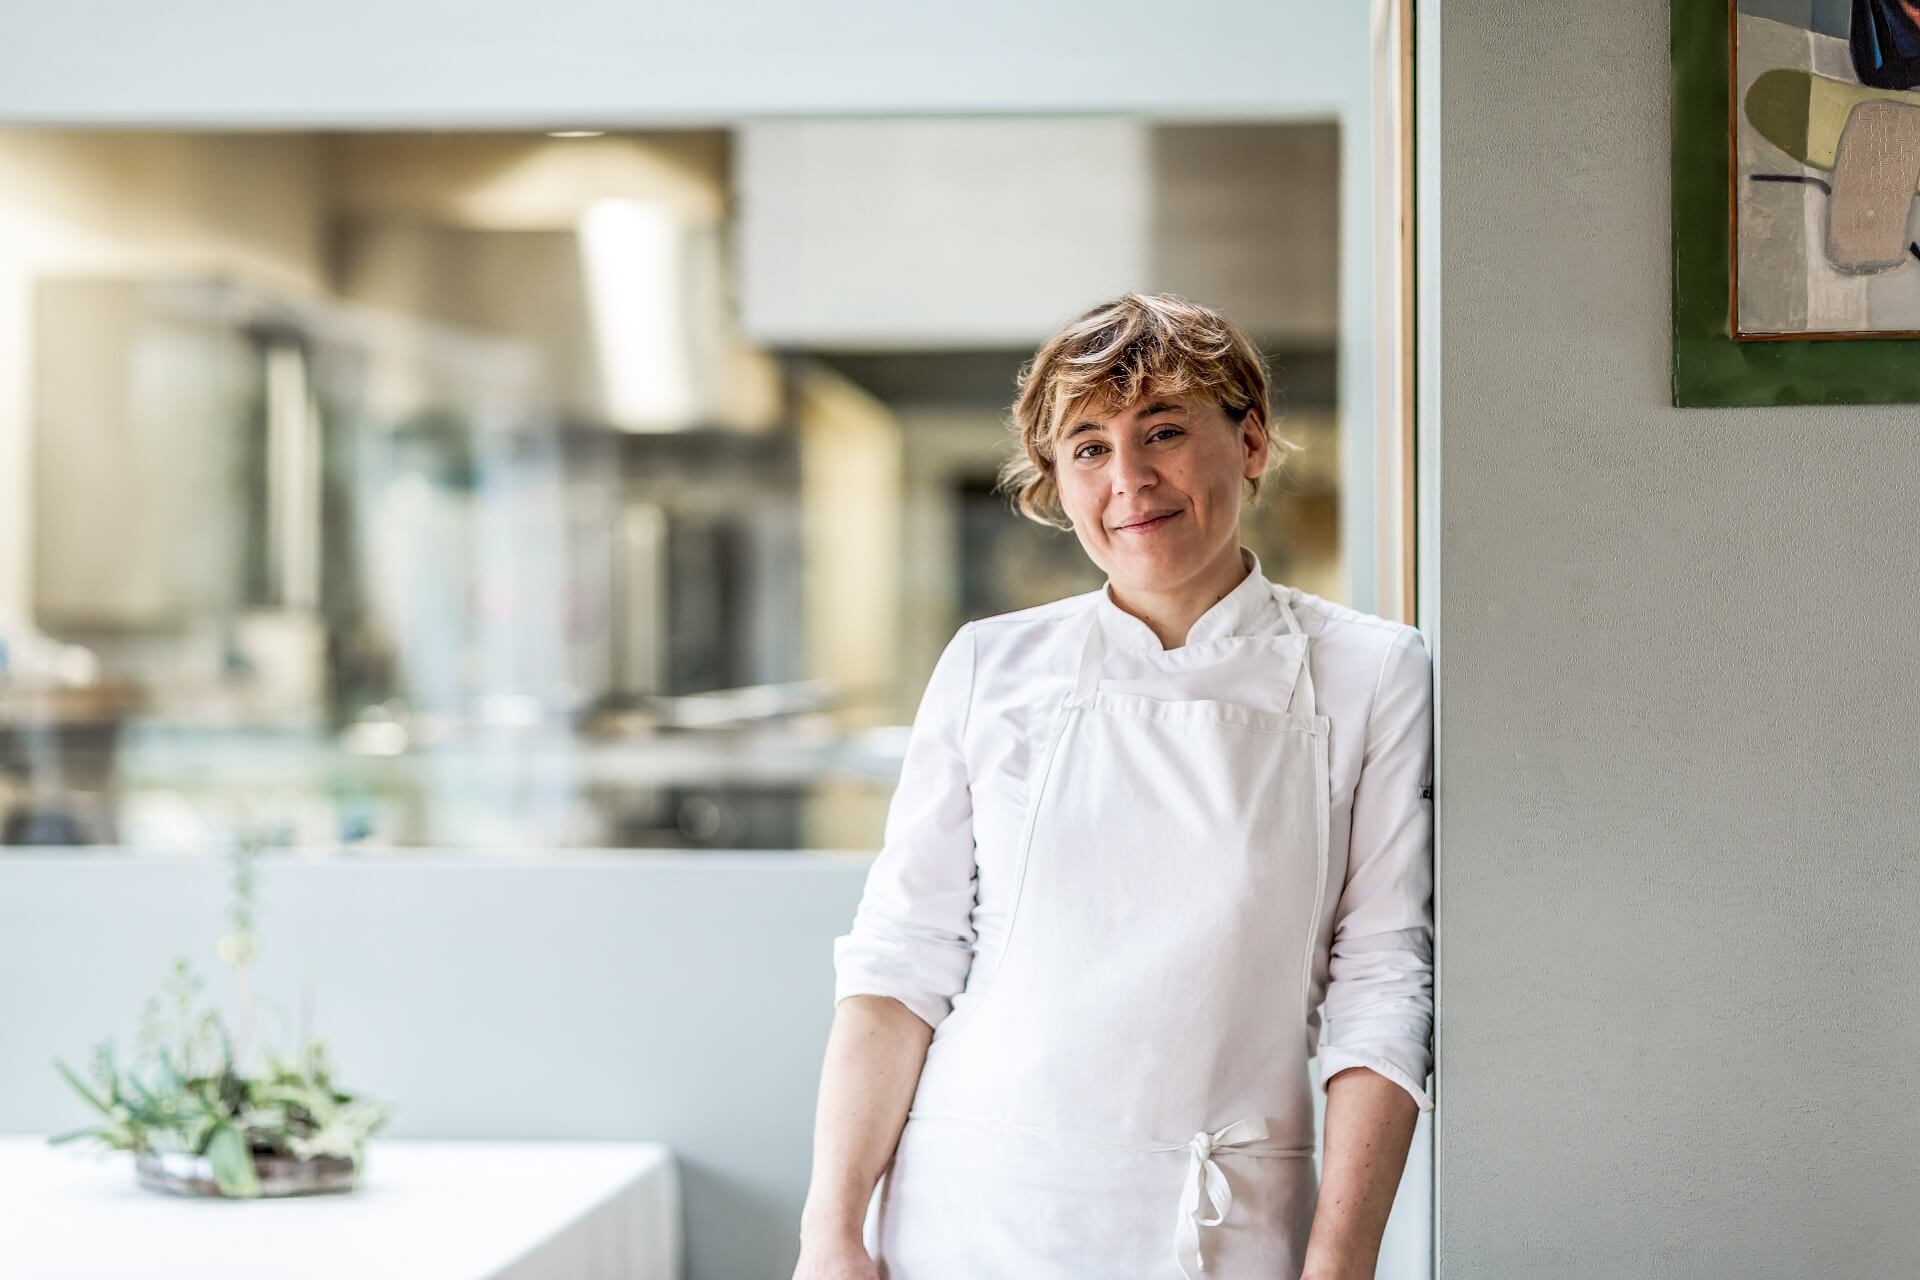 The Italian star chef Antonia Klugmann in front of her kitchen at L'Argine a Vencò